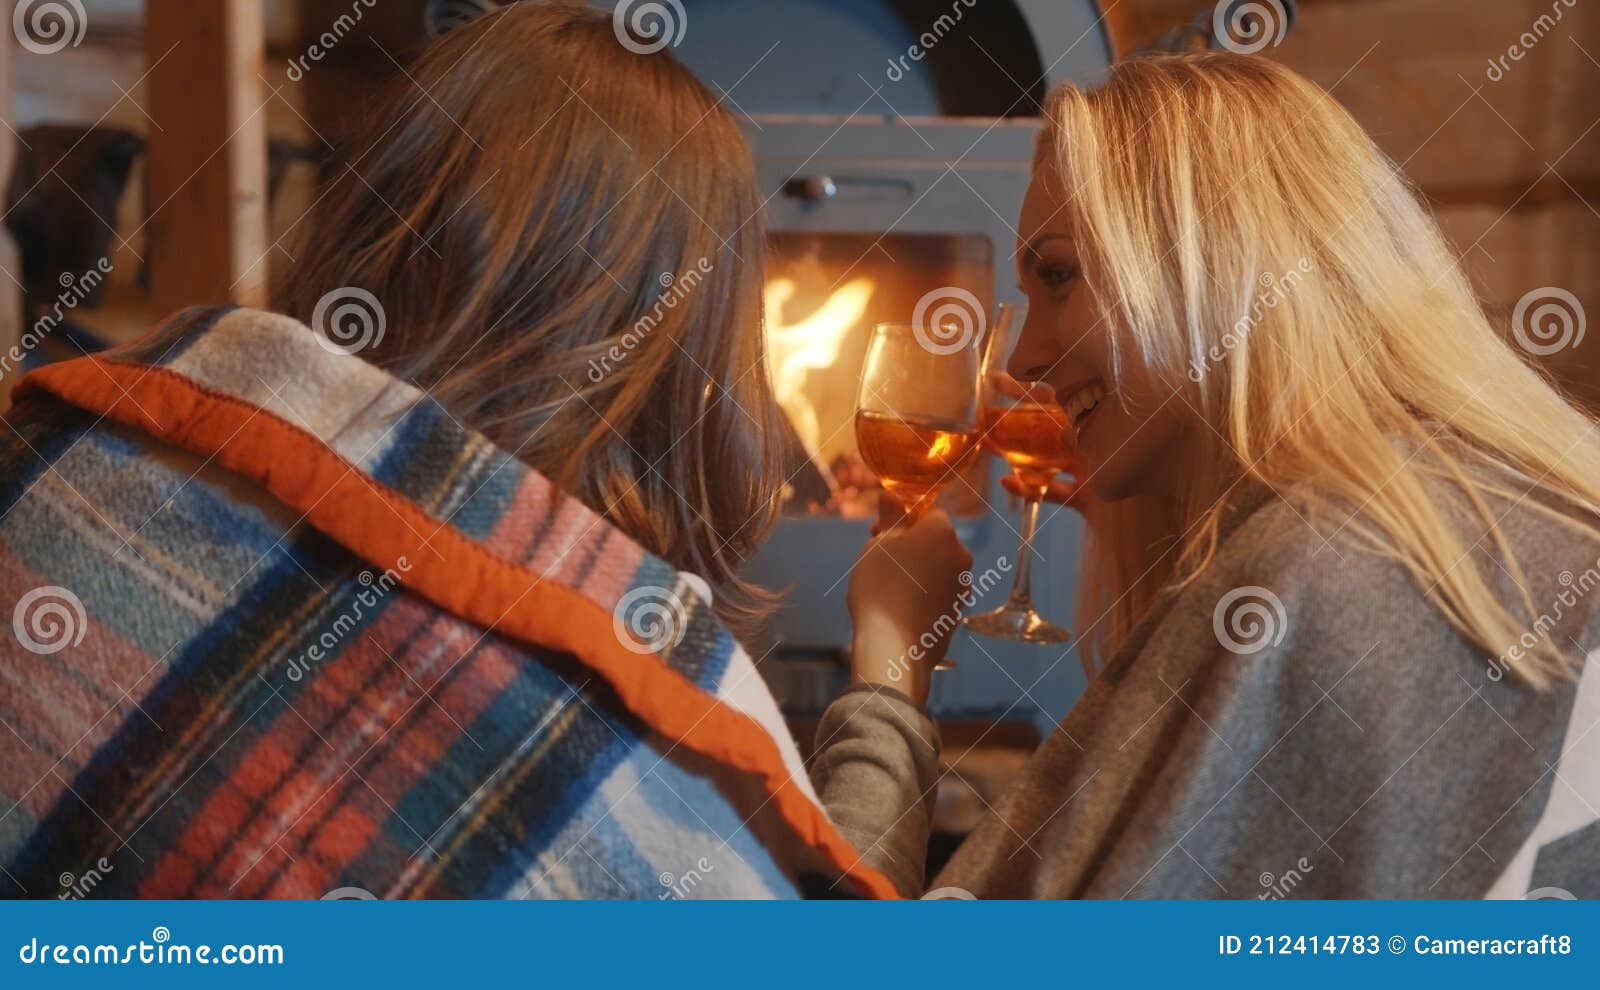 Two Young Women Lesbian Couple Relaxing Near The Fireplace And 